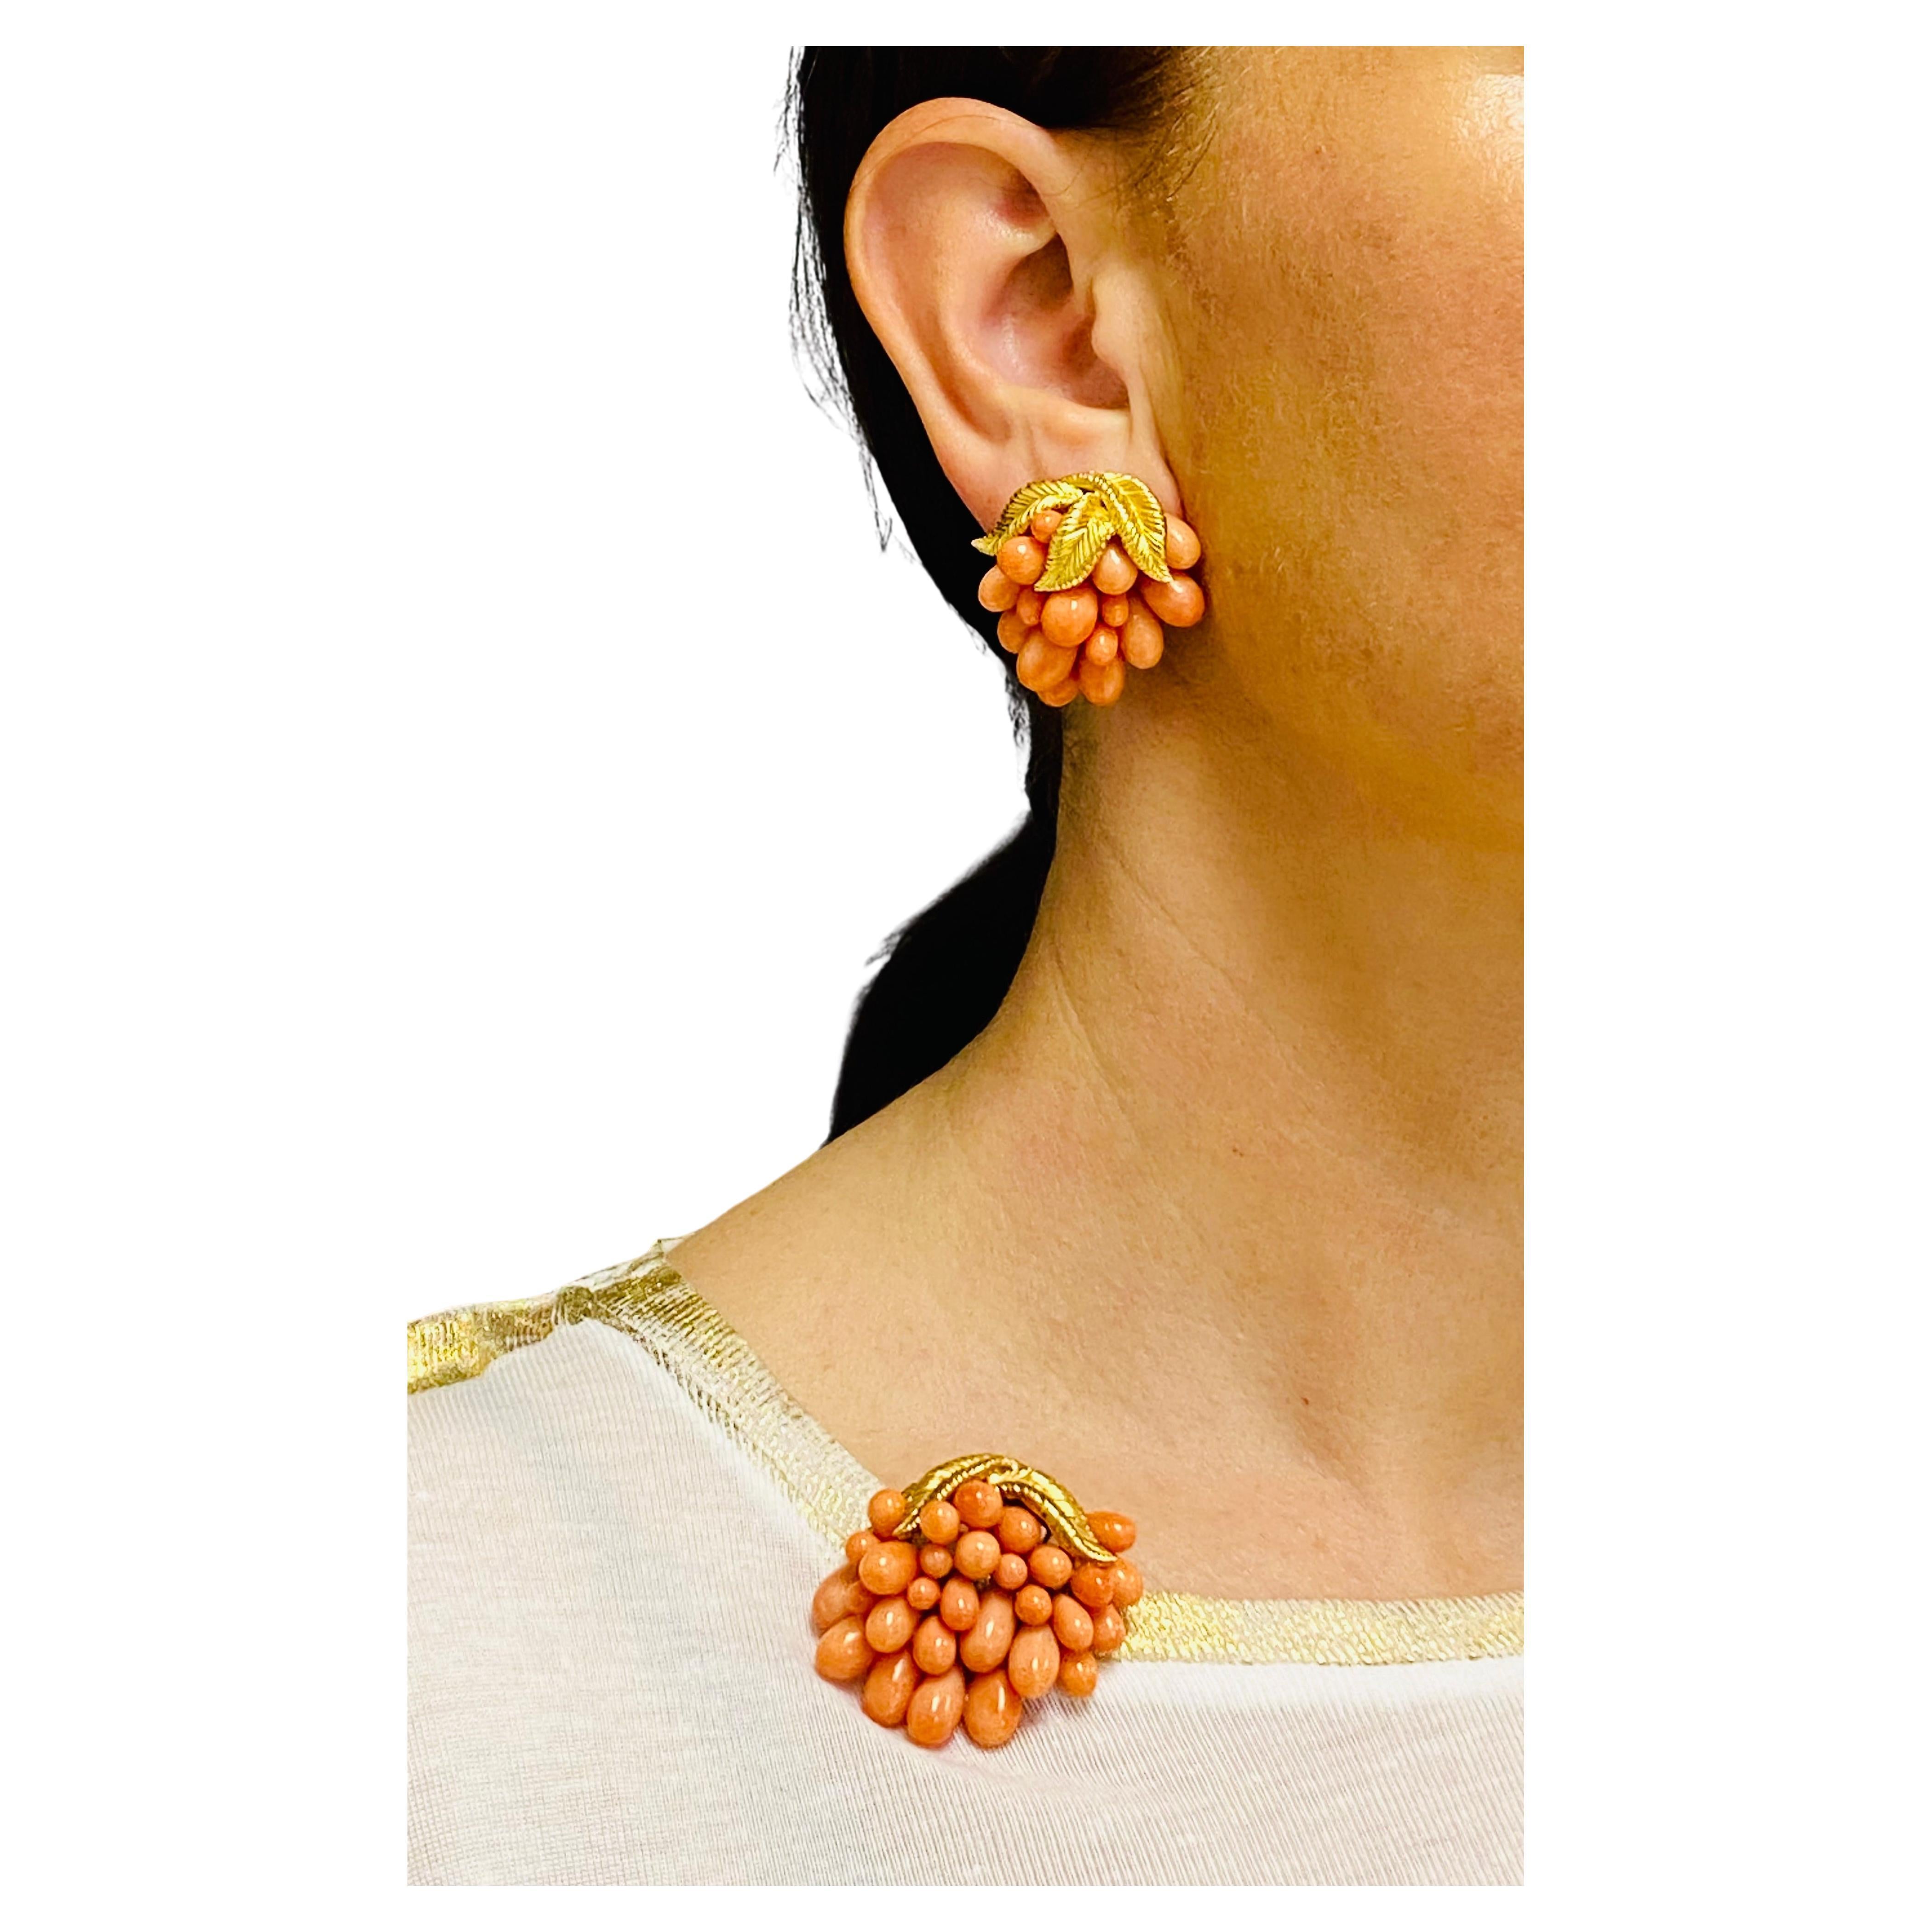 A beautiful vintage French set consisting of the brooch and earrings, made of coral and 18k gold.  The set of botanical design includes the grape cluster earrings and the brooch. The coral has a beautiful salmon to the light orange hue. Glossy coral